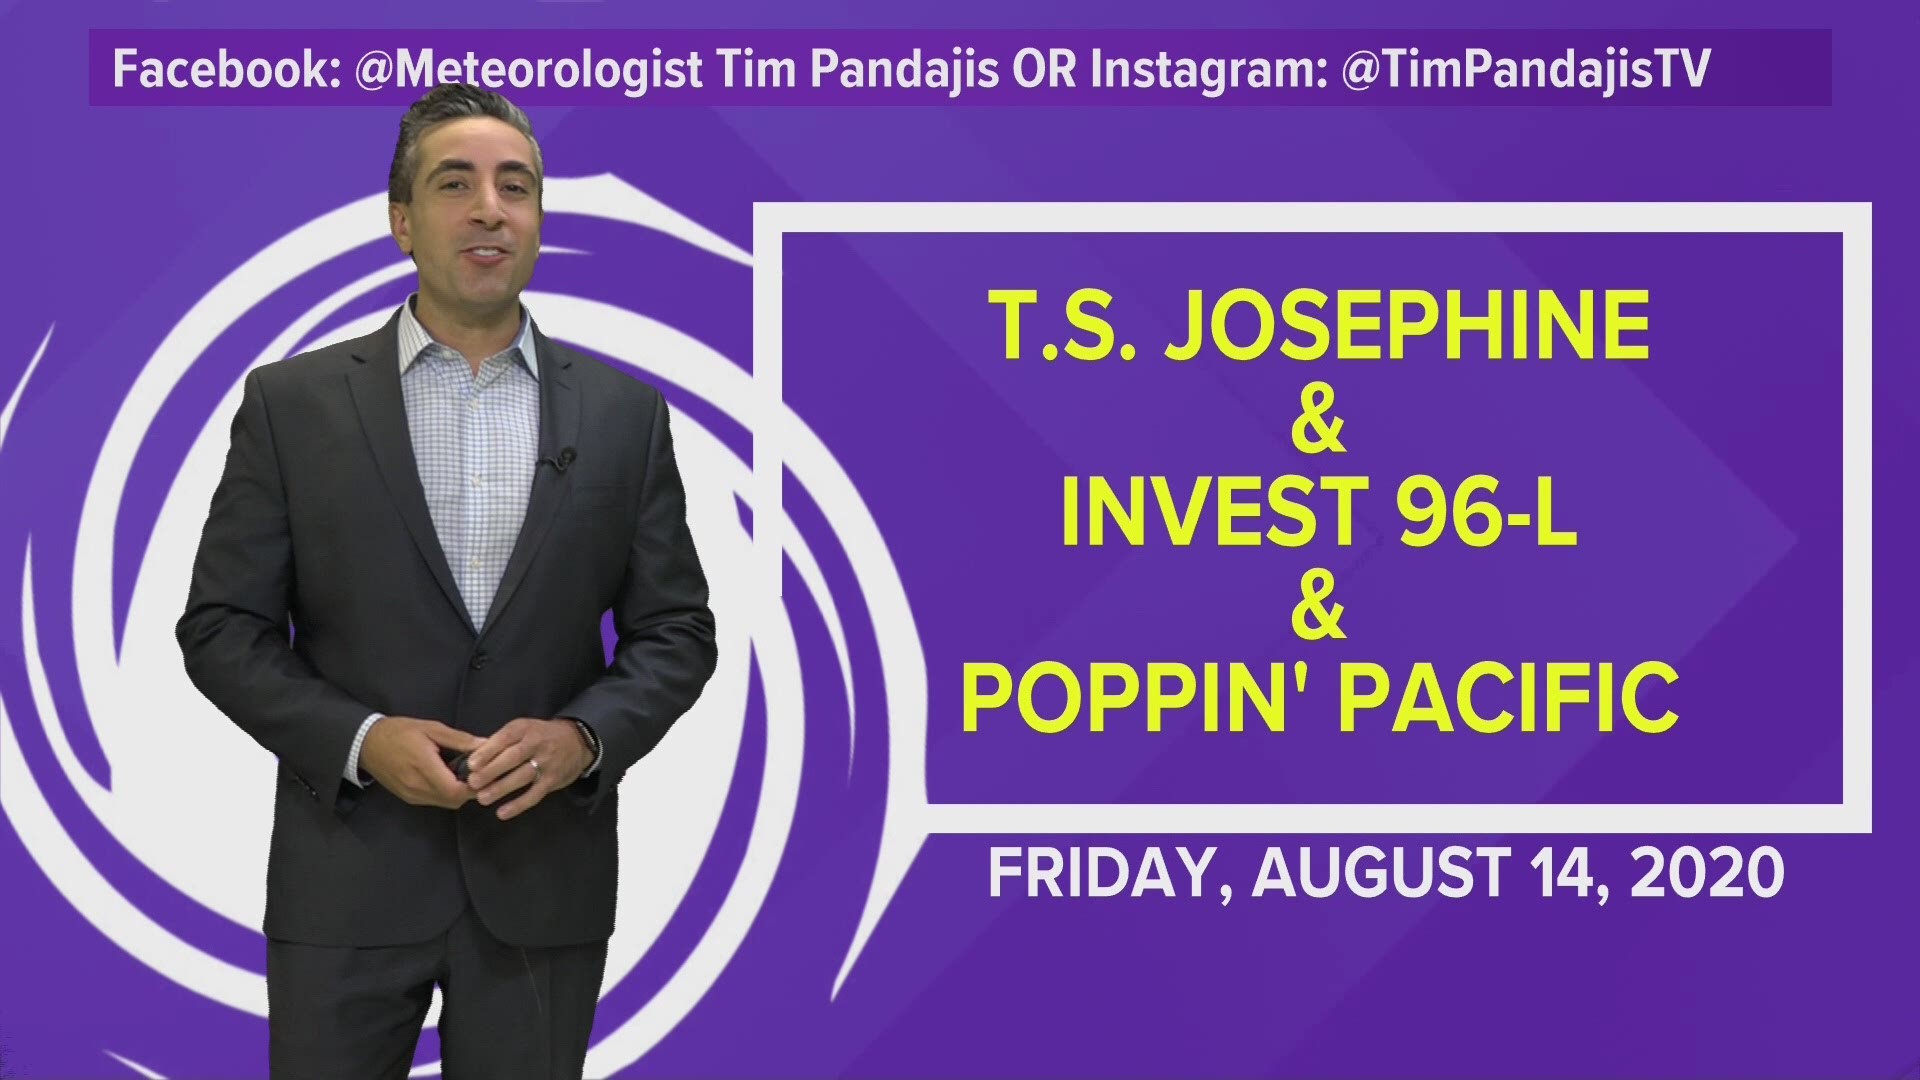 Tropical Storm Josephine is struggling to maintain tropical storm status. Meteorologist Tim Pandajis also gives an update about Invest 96-L.